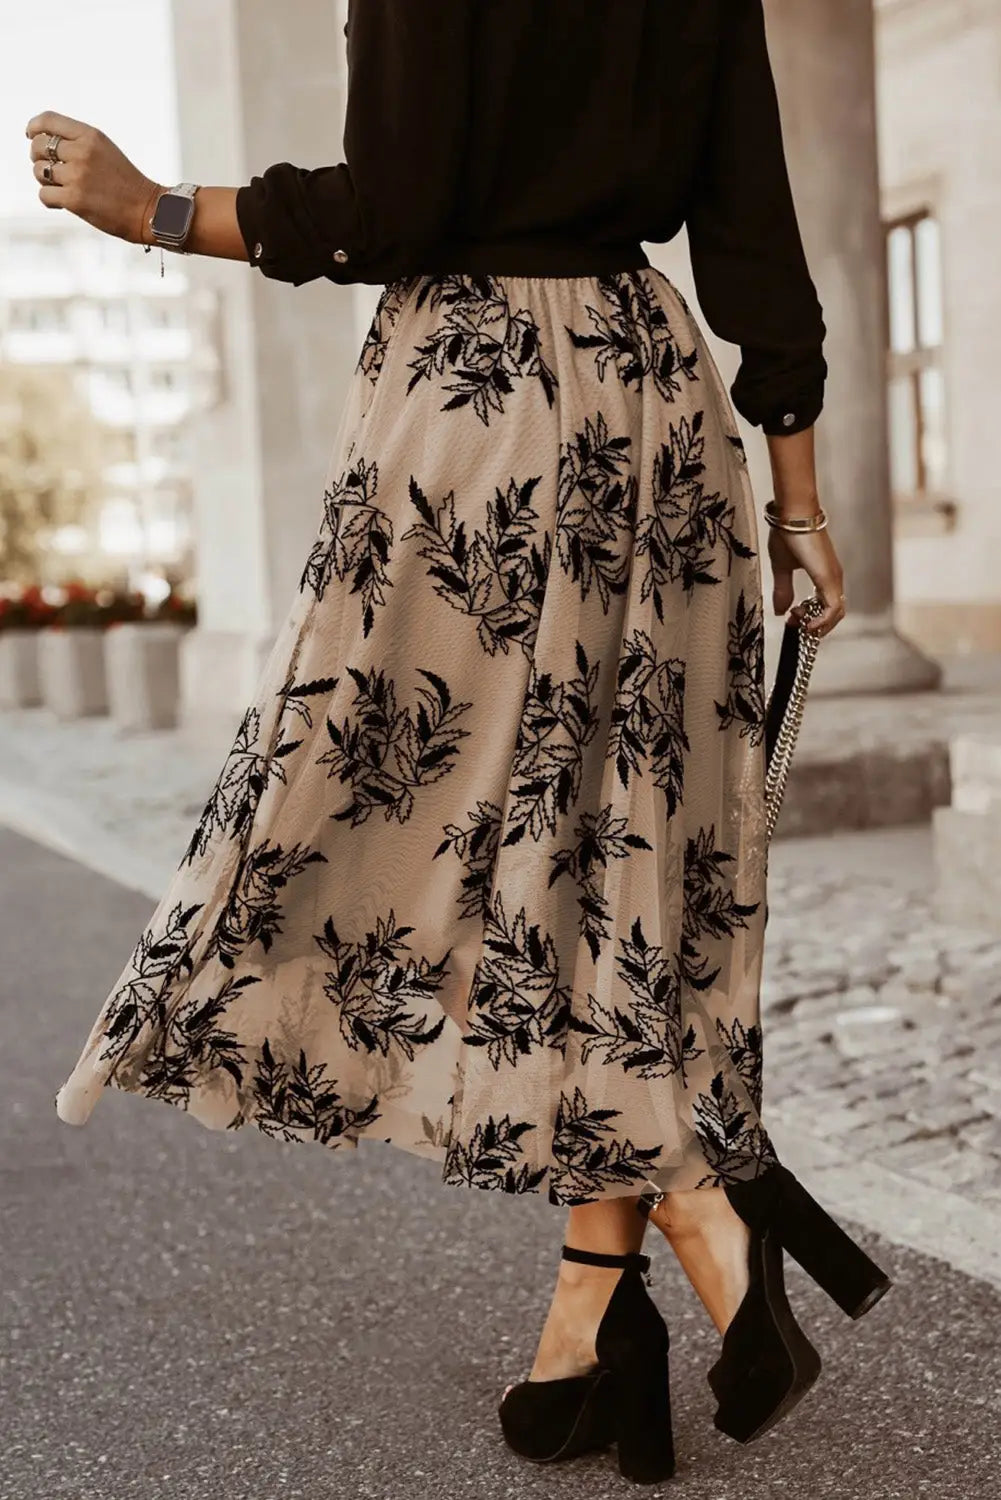 Apricot floral leaves embroidered high waist maxi skirt